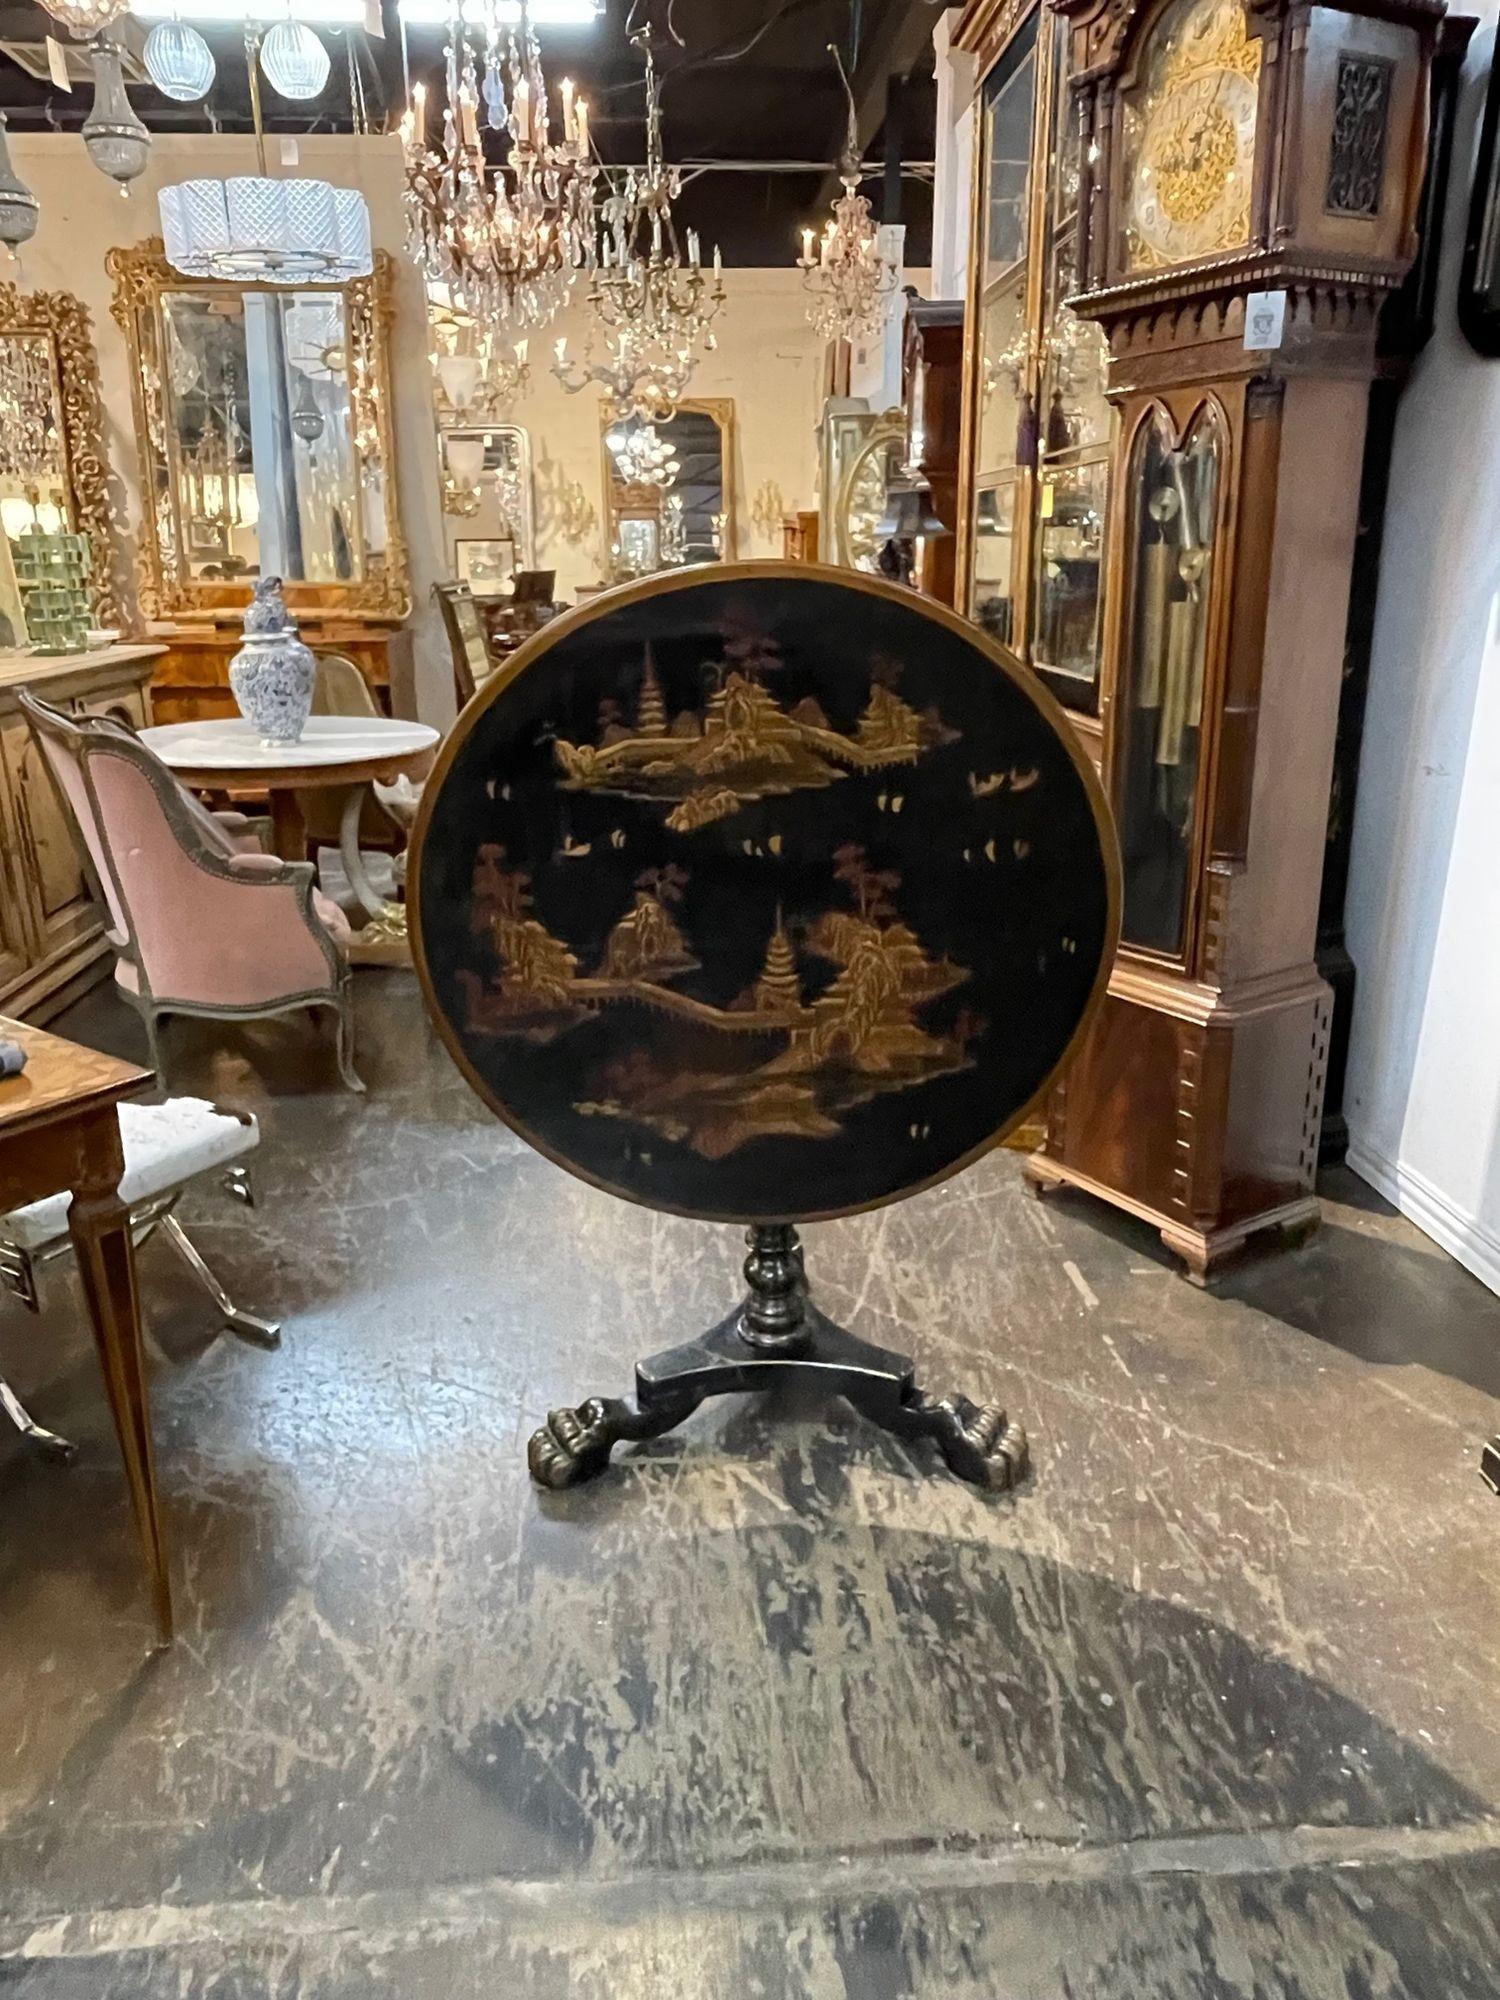 Exqusite 19th century English black lacquered tilt top table with Chinoiserie design. Gorgeous hand painted Asian images. A true work of art. Stunning!!